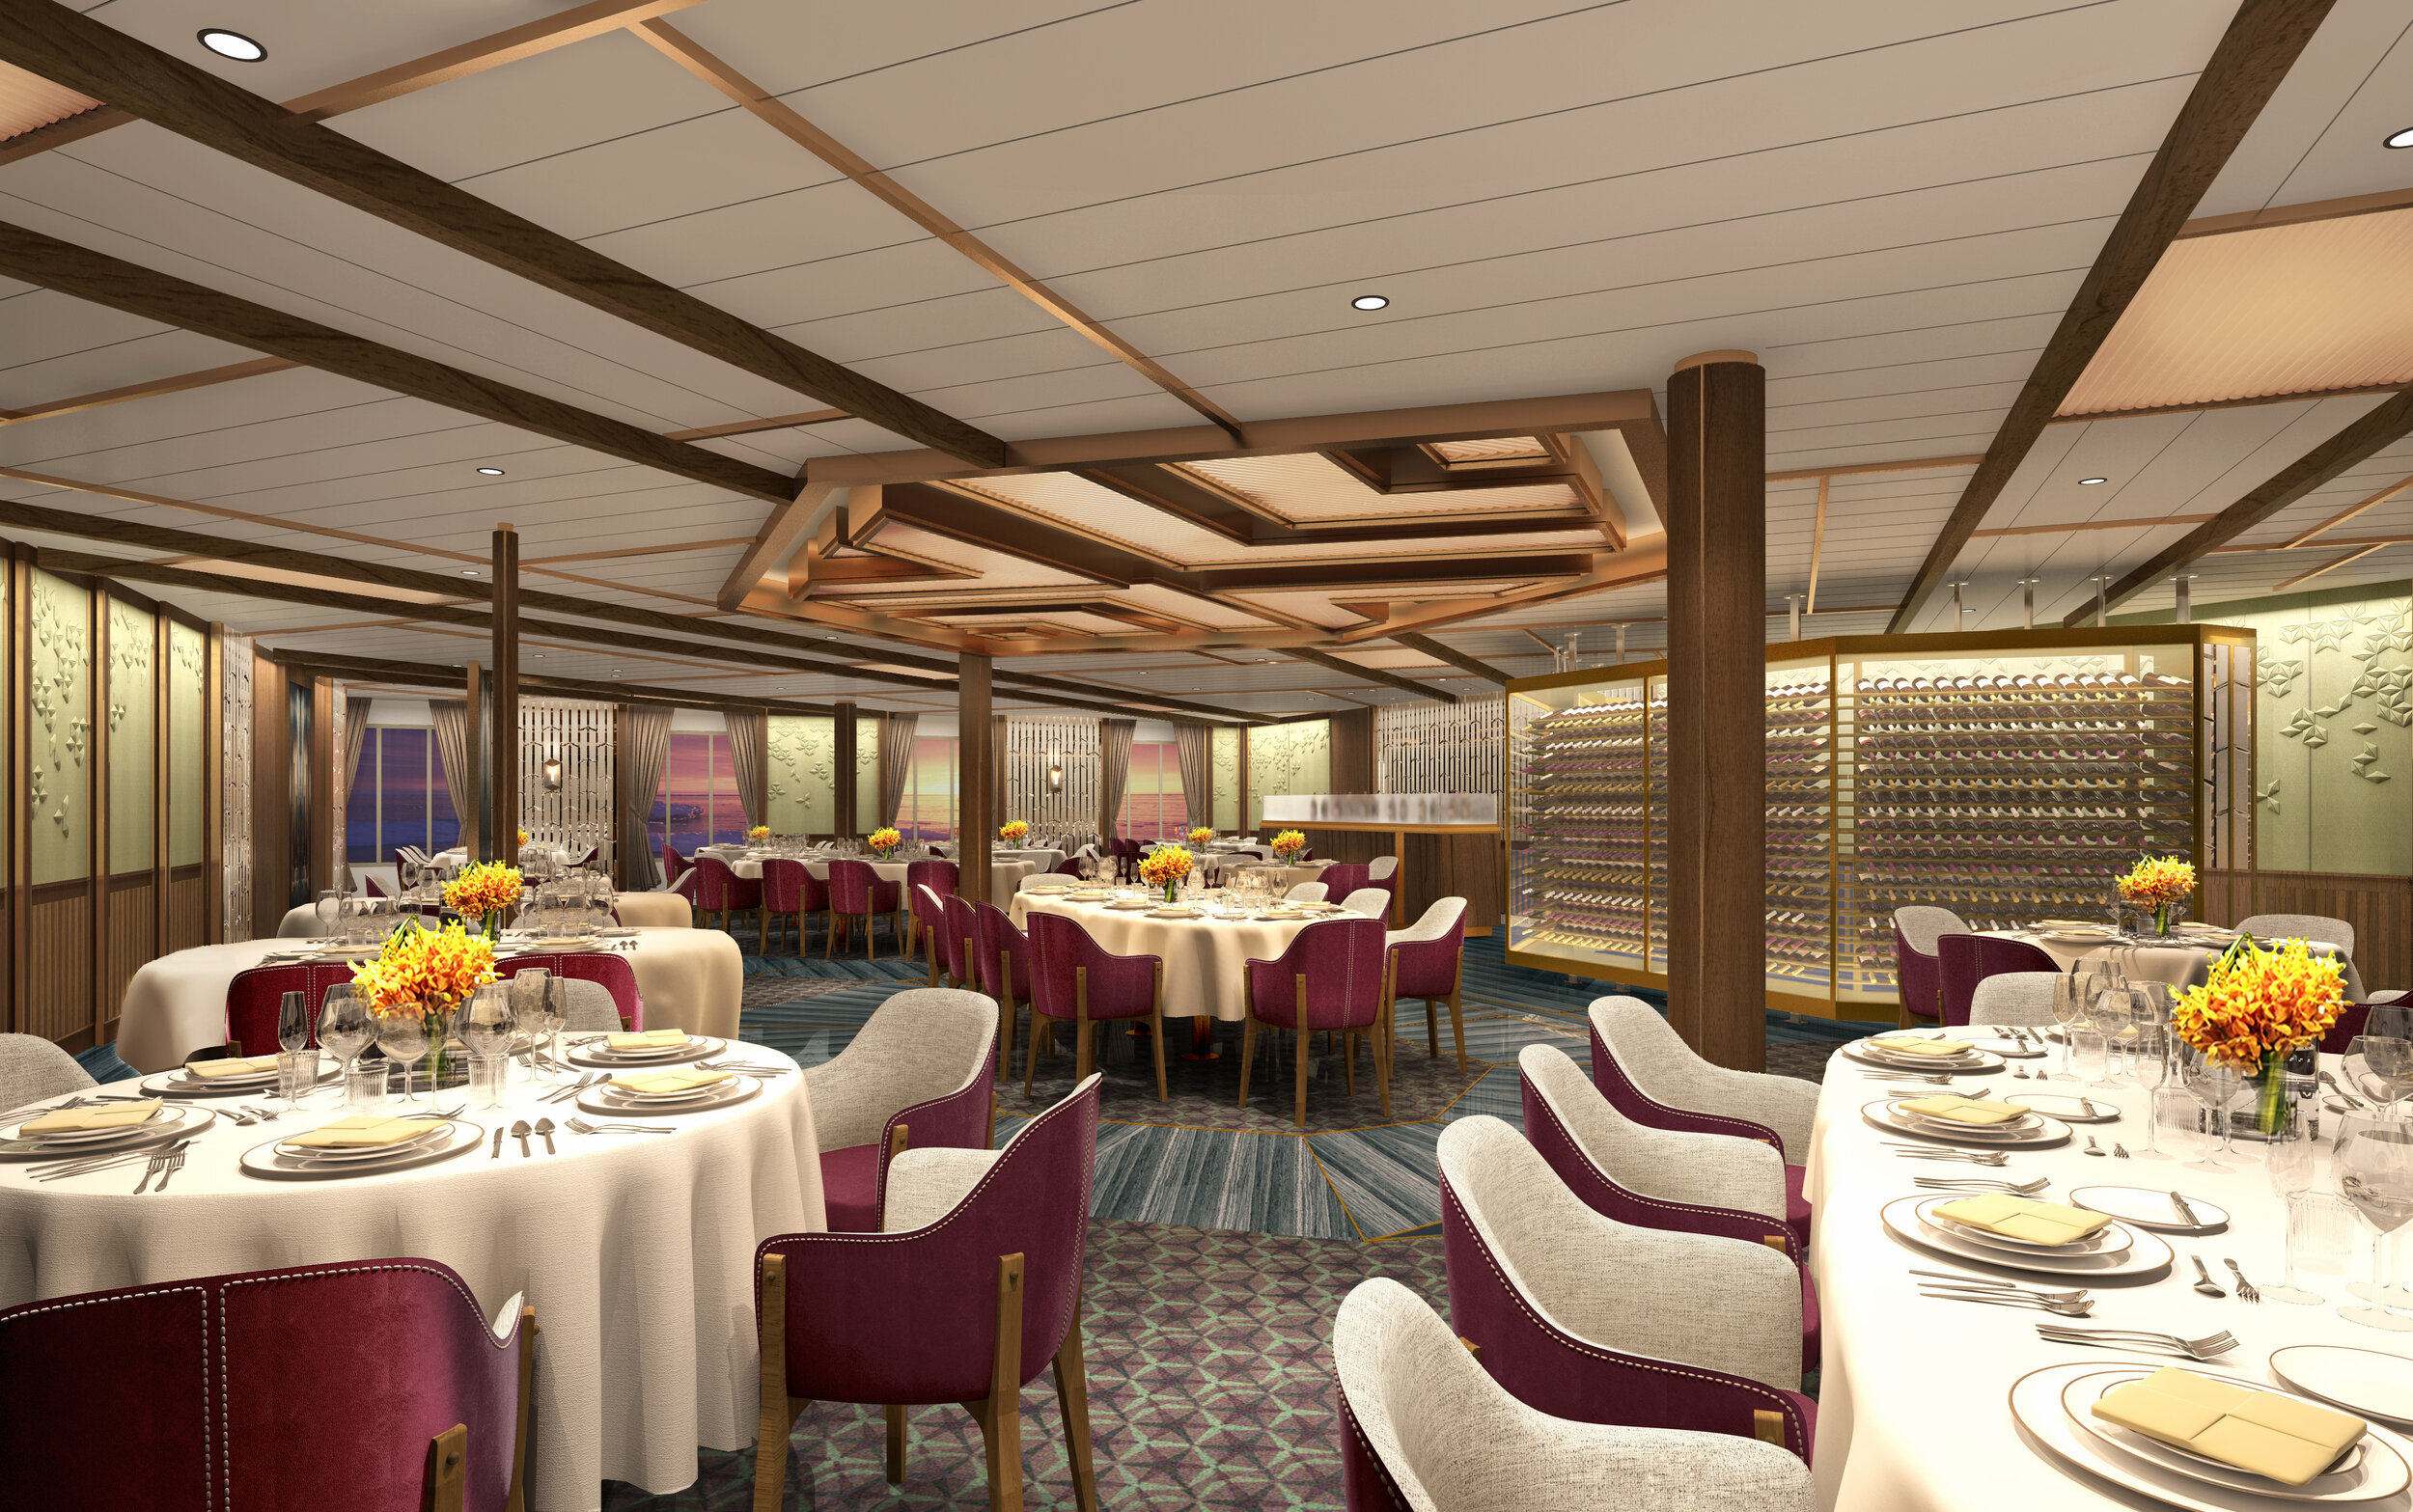 Seabourn expedition ships - The Restaurant rendering.jpg